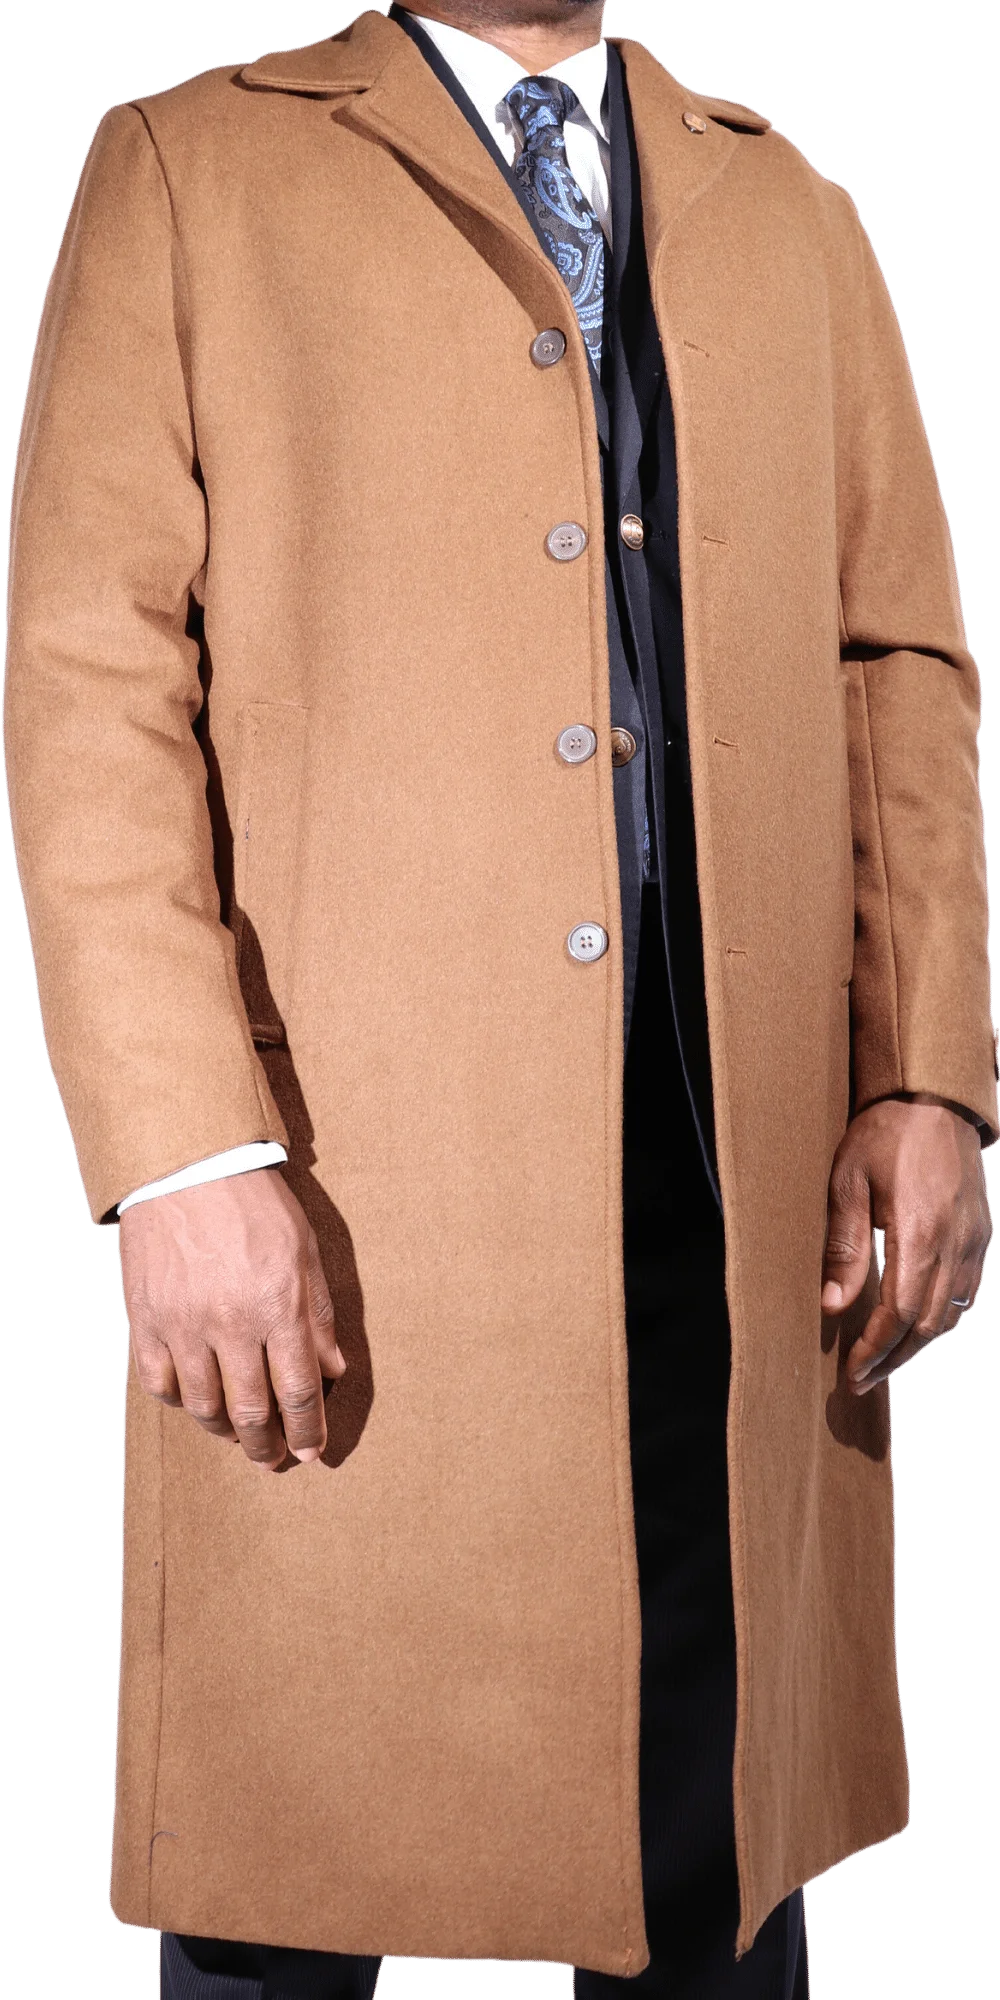 Men's Navada Clothing Cashmere Trenchcoat/overcoat in Tan (111) available in-store, 337 Monty Naicker Street, Durban CBD or online at Omar's Tailors & Outfitters online store.   A men's fashion curation for South African men - established in 1911.